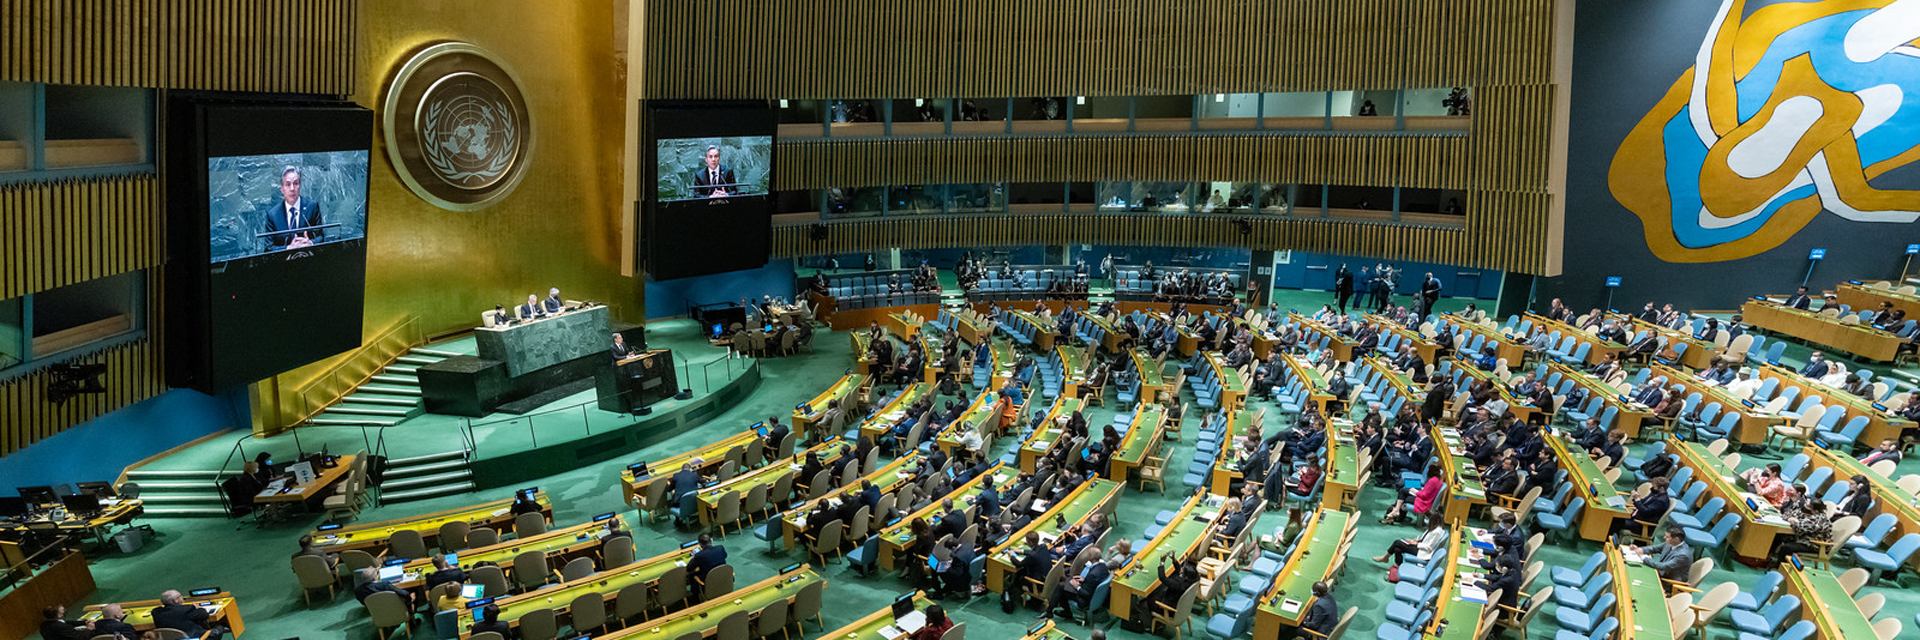 United Nations General Assembly chambers